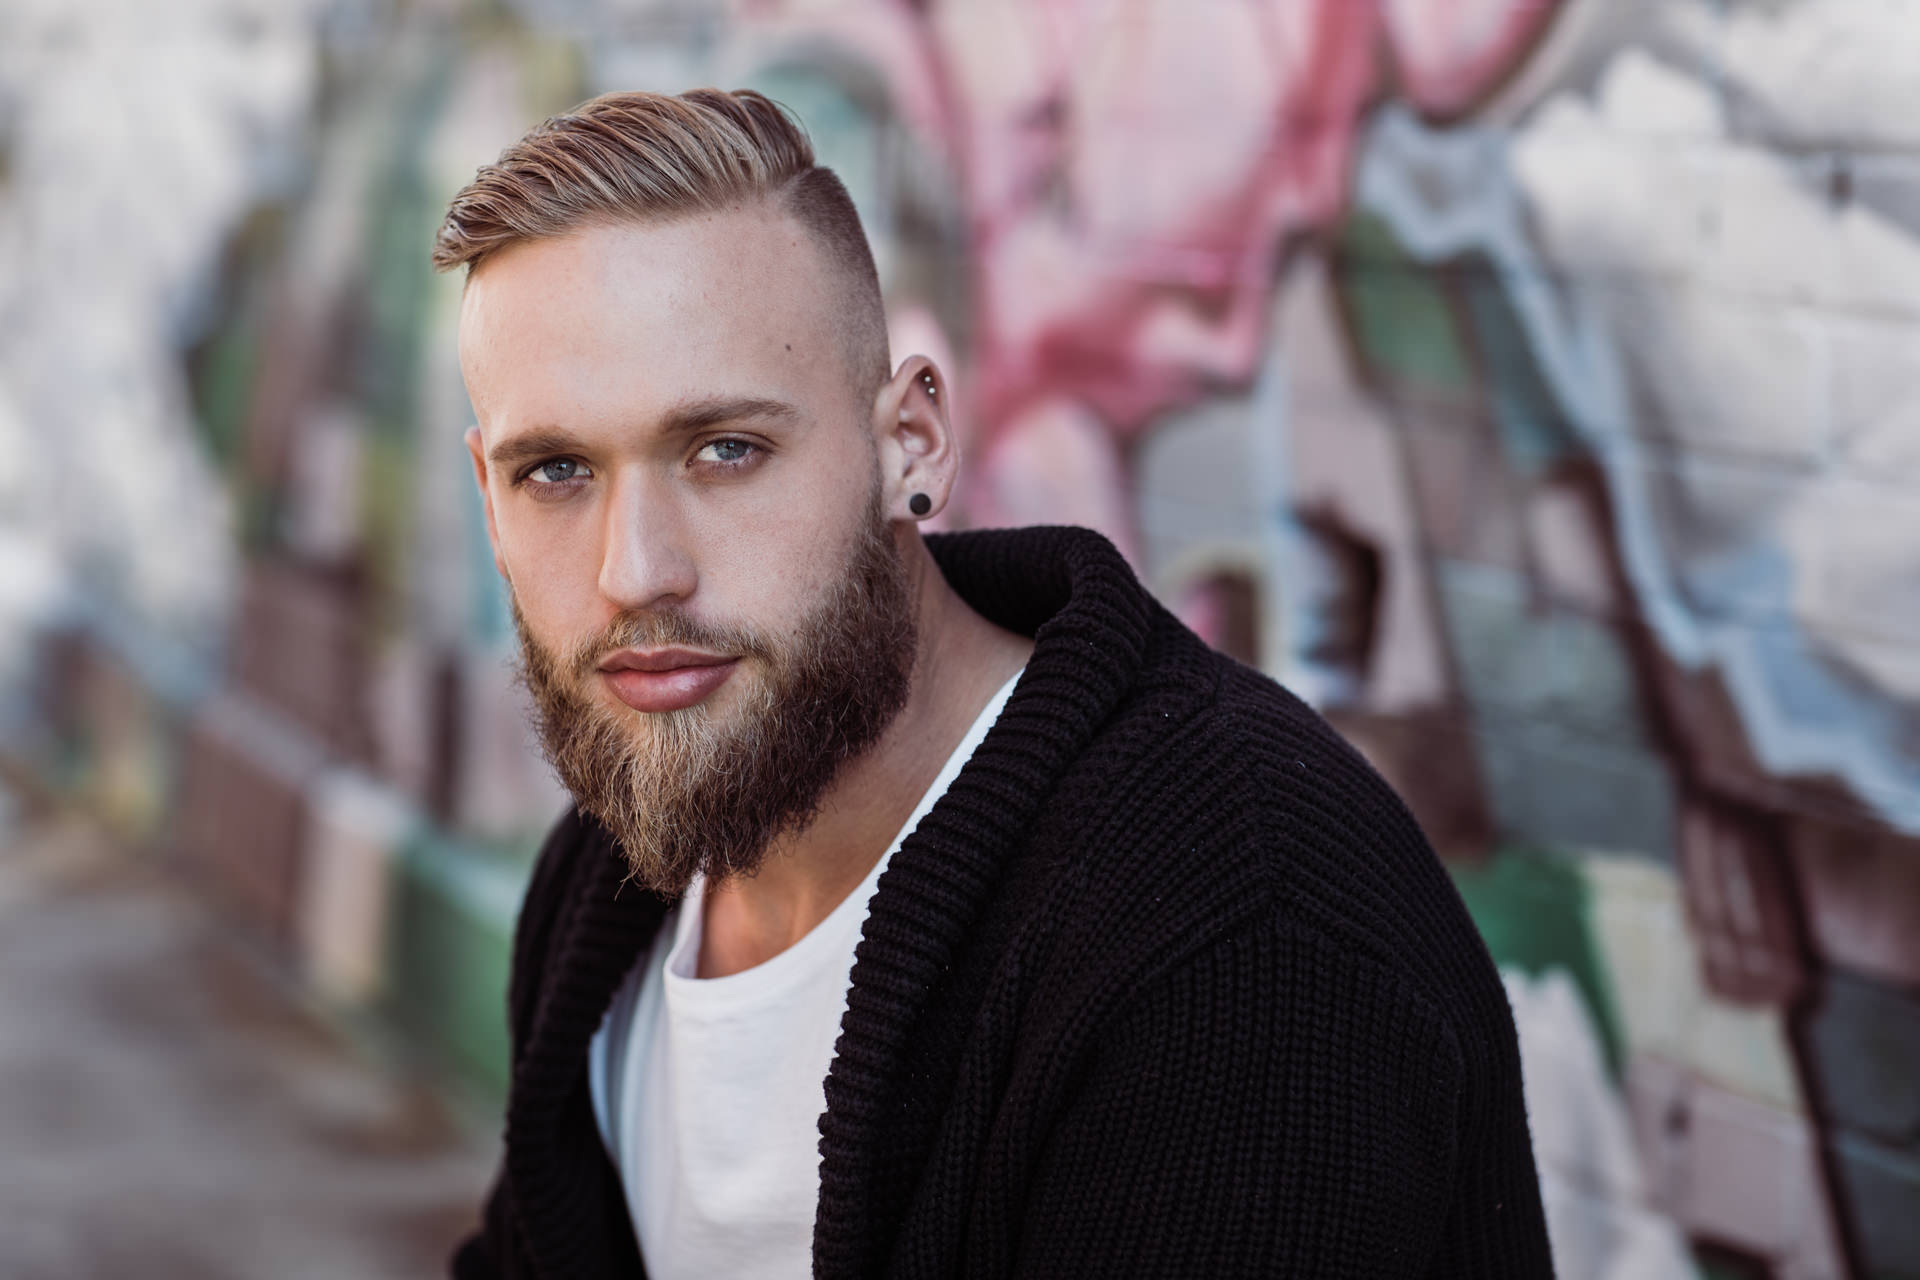 male portrait - fashion and outfit photographer in melbourne